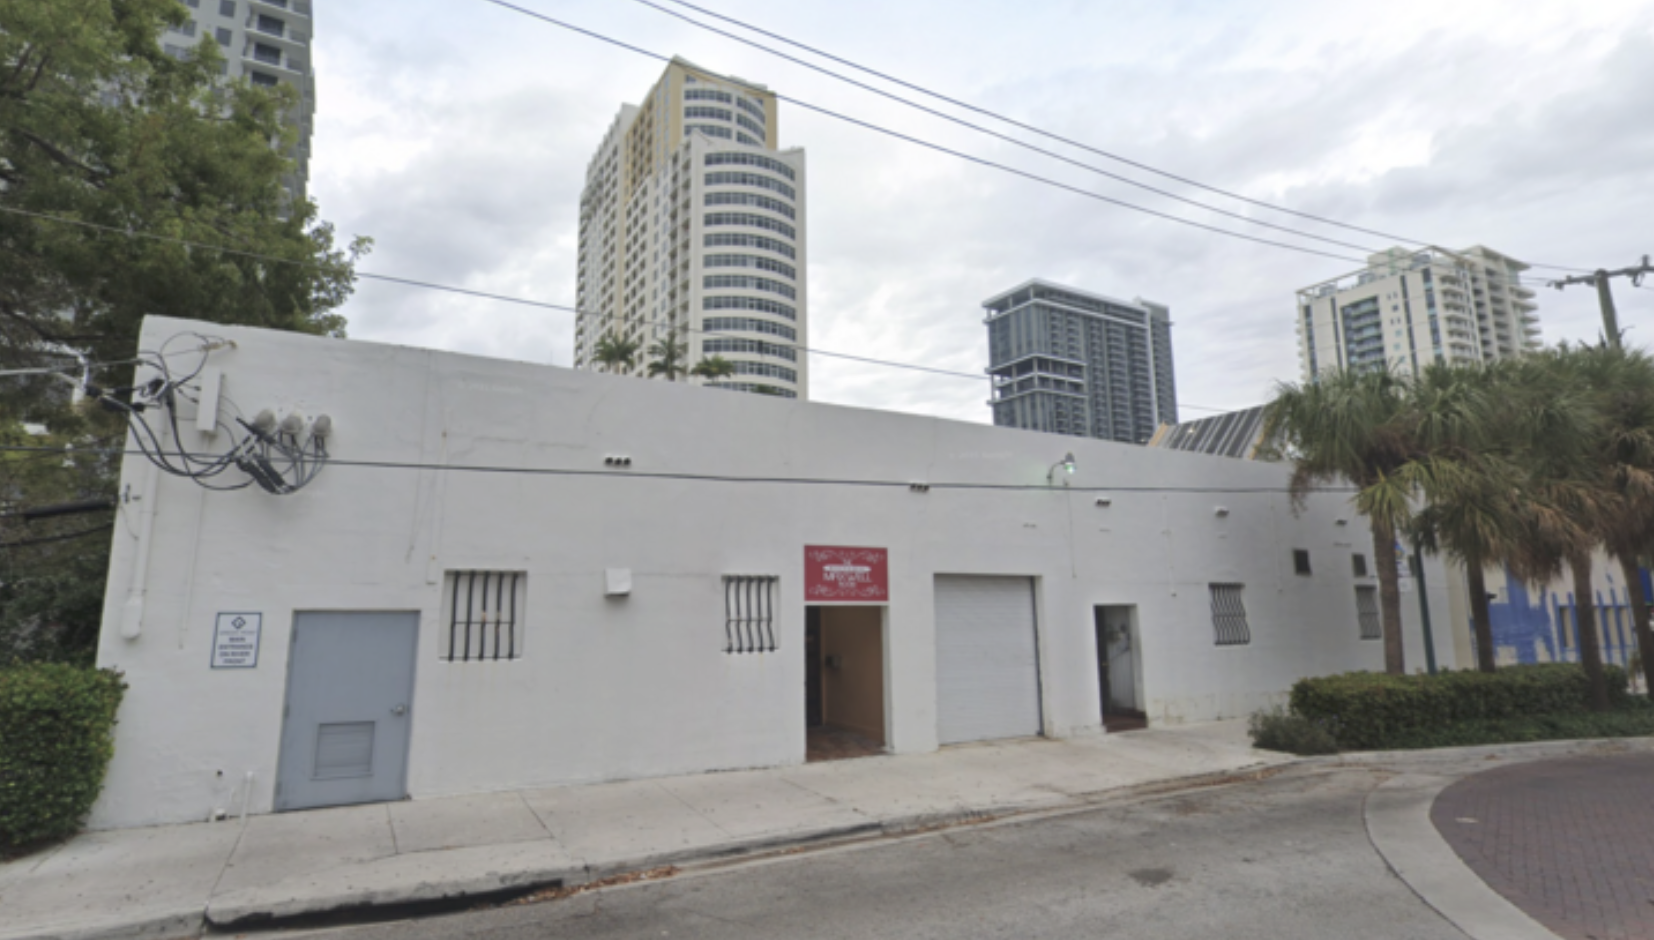 Downtown Fort Lauderdale building sells for $15M